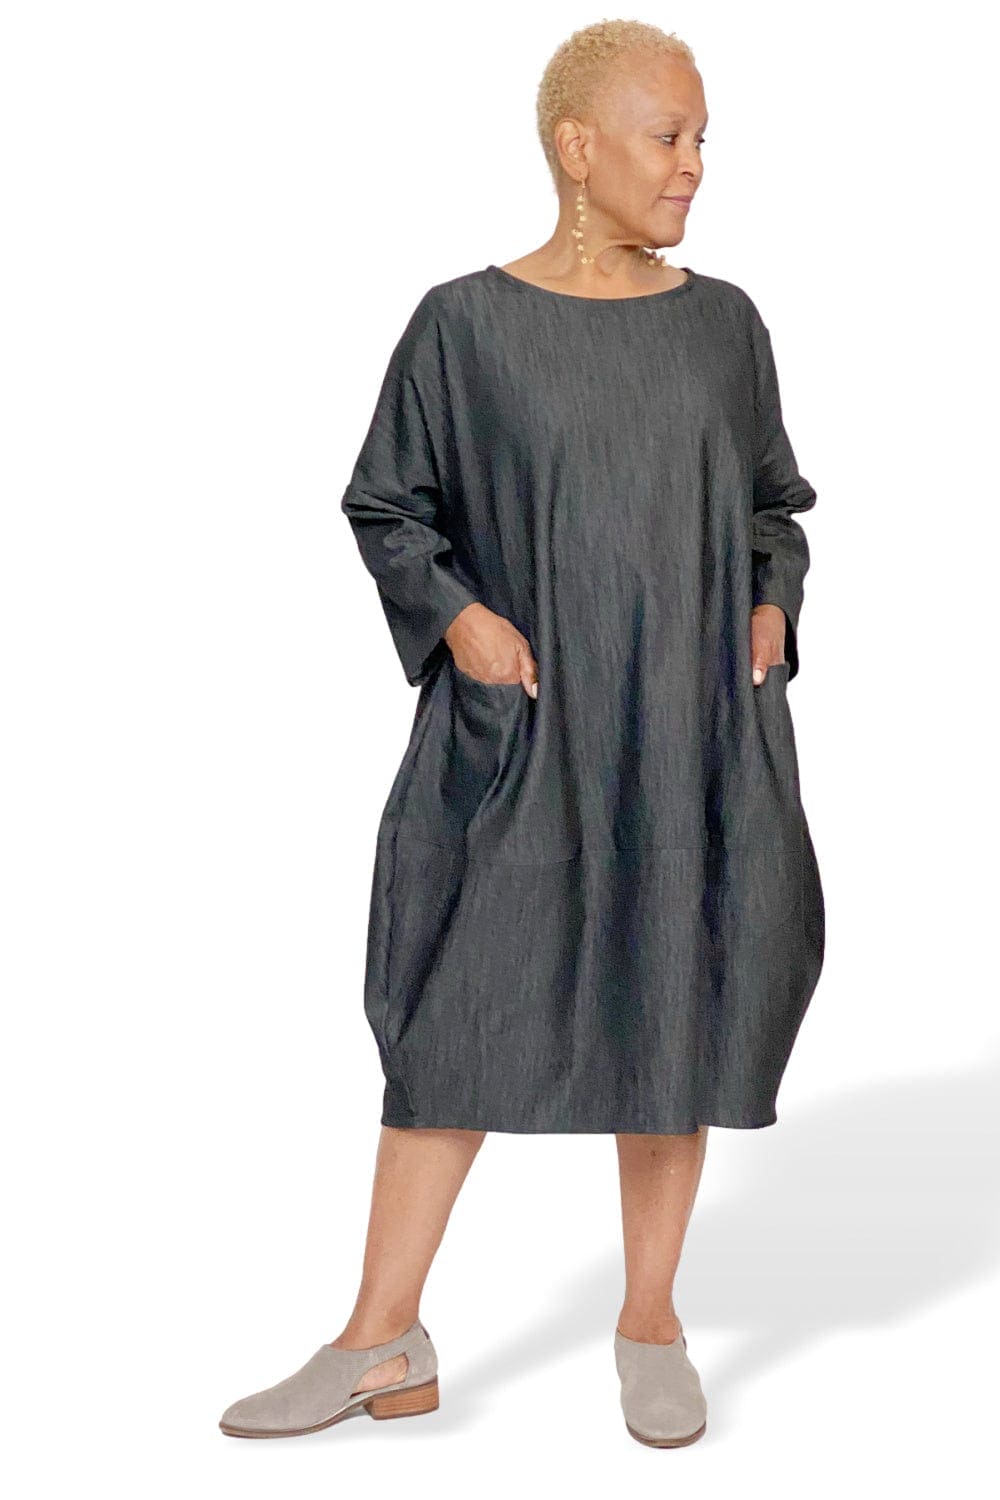 Loose fit dress with two front pockets and long sleeves worn on a 5'3" older woman.